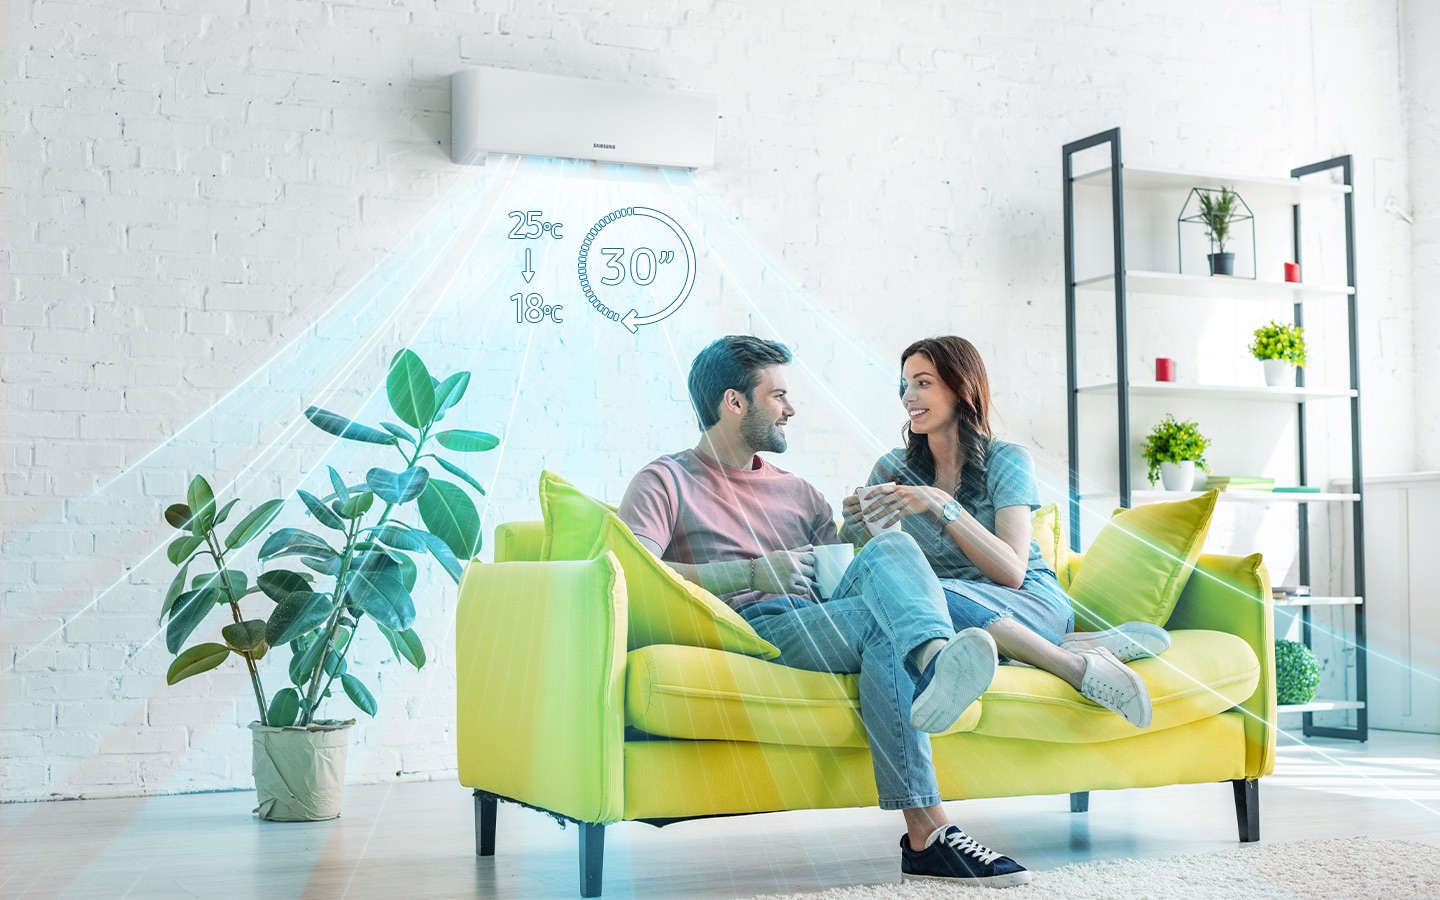 Shows the air conditioner mounted on a wall above two people sitting on a sofa as it distributes cool air that surrounds them. Figures show that it can rapidly cool the room from 25°C to 18°C in just 30 minutes.